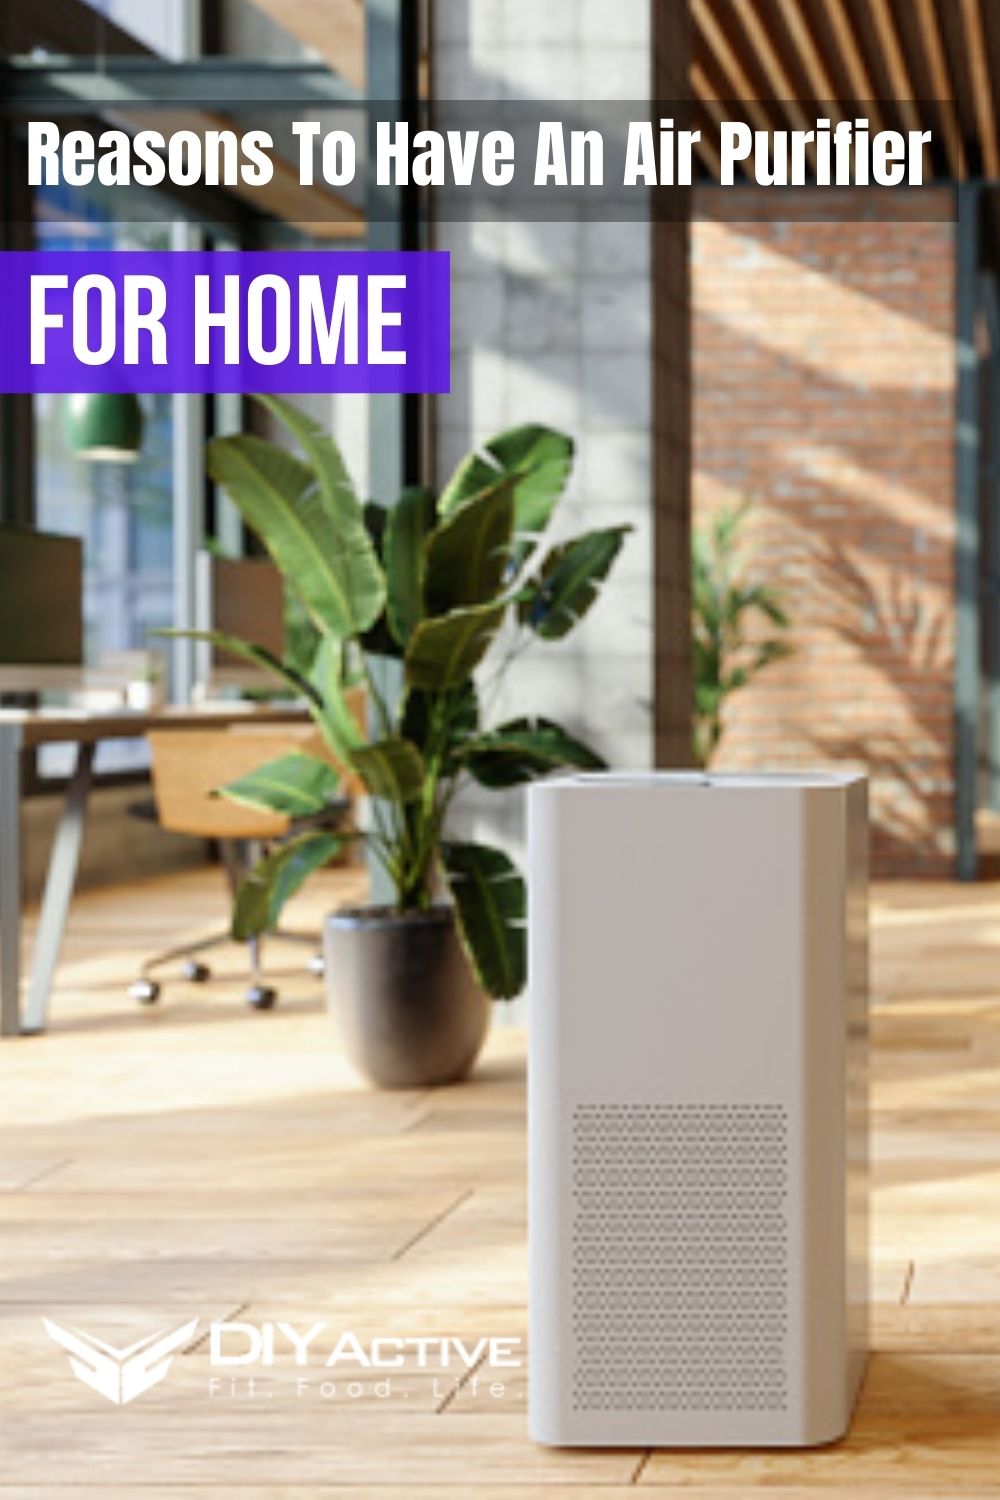 7 Reasons To Have An Air Purifier For Home